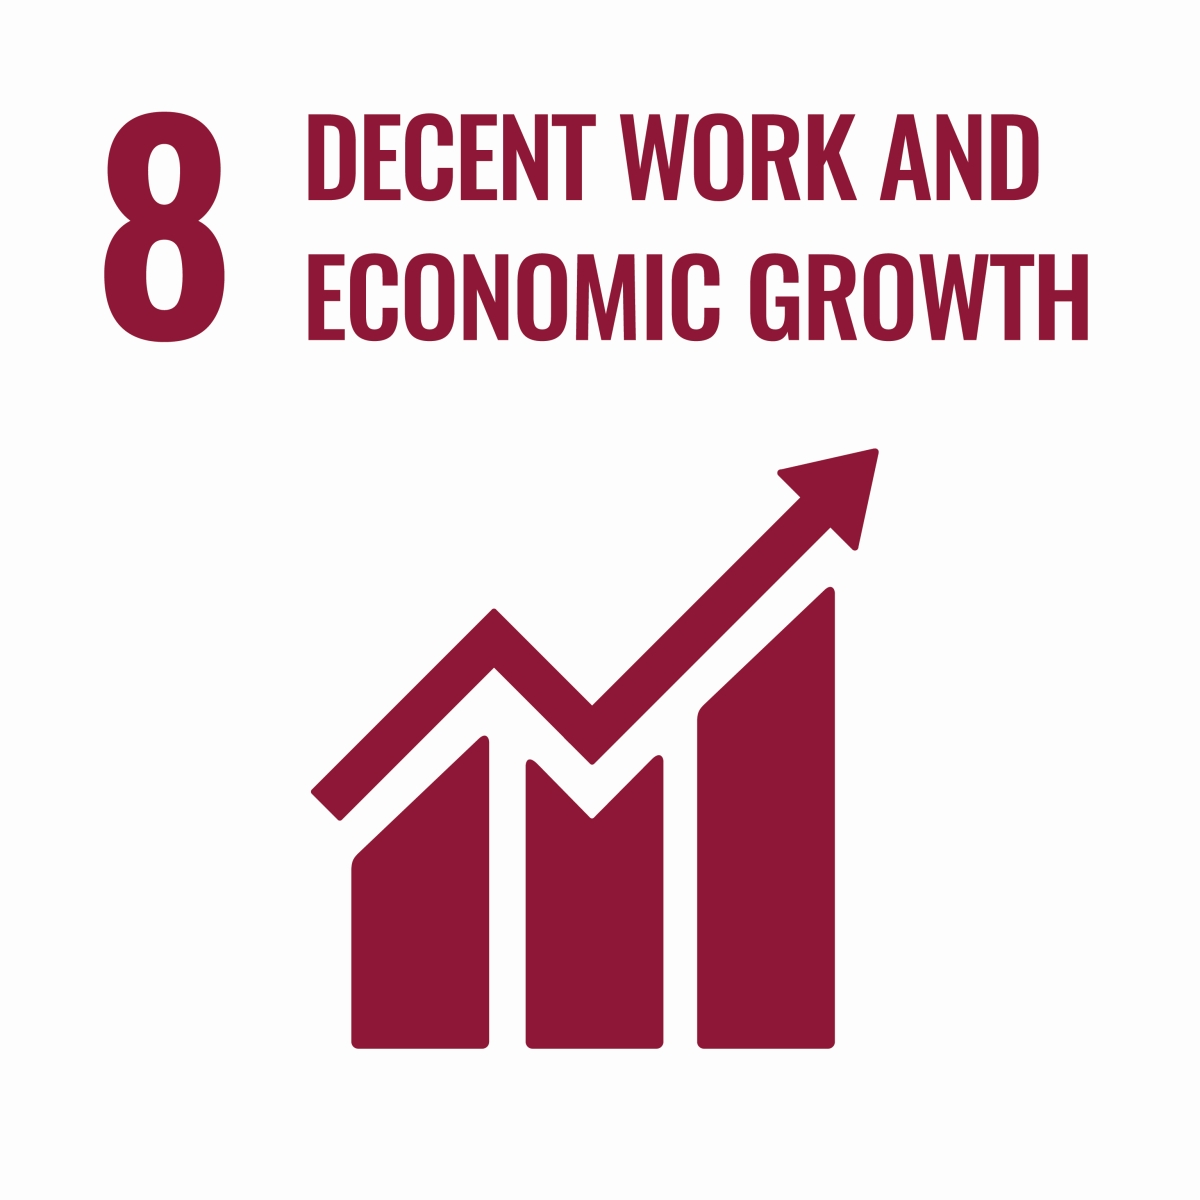 [Translate to German:] Decent work and economic grwoth